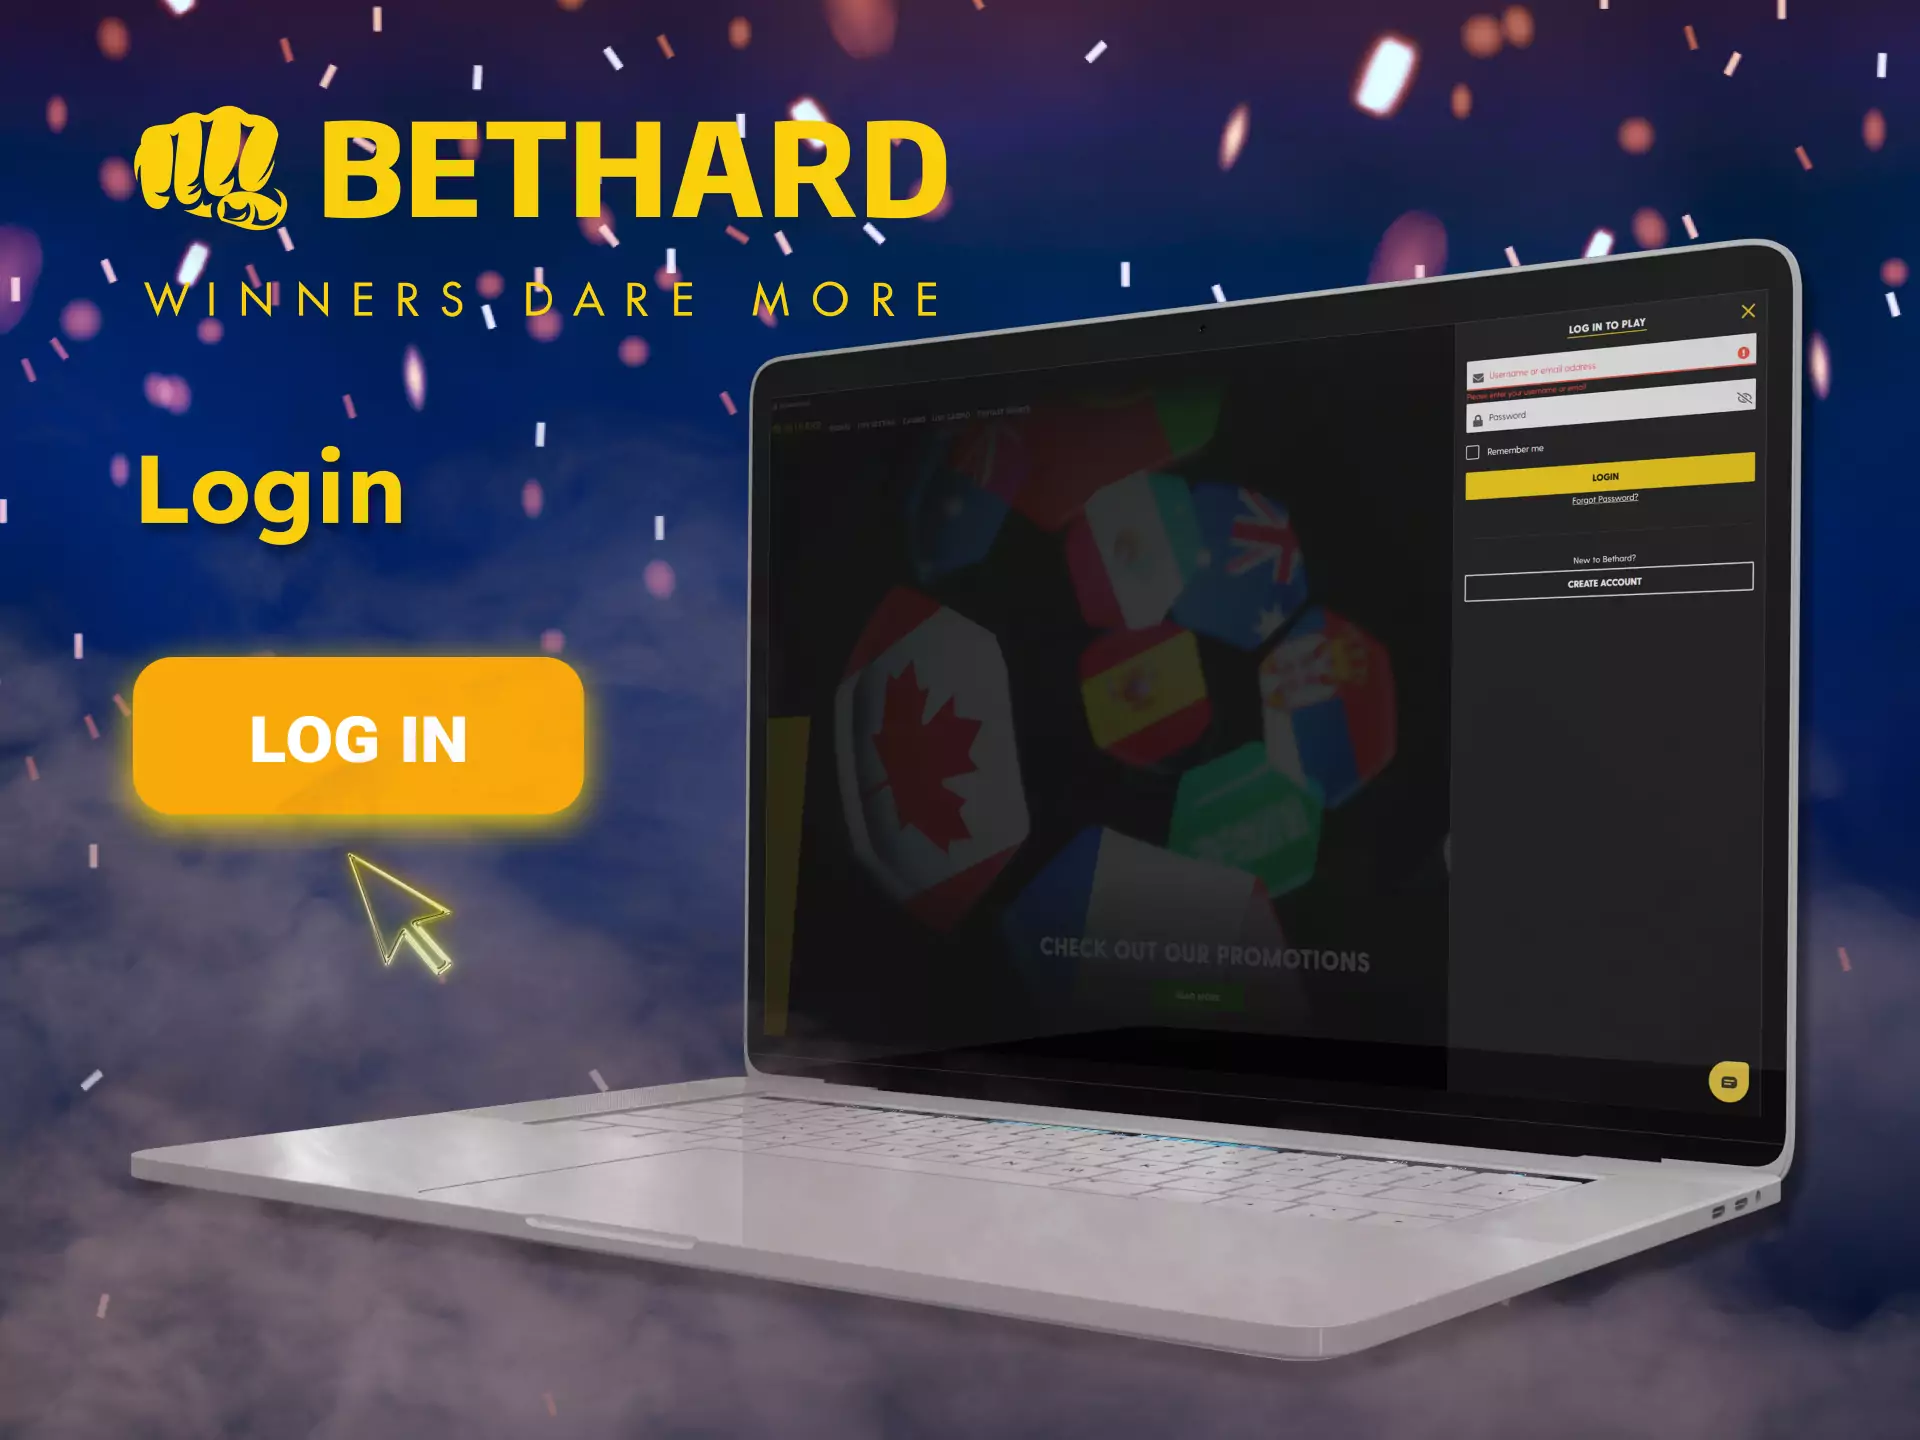 Log into your Bethard account to place bets and play at the casino.